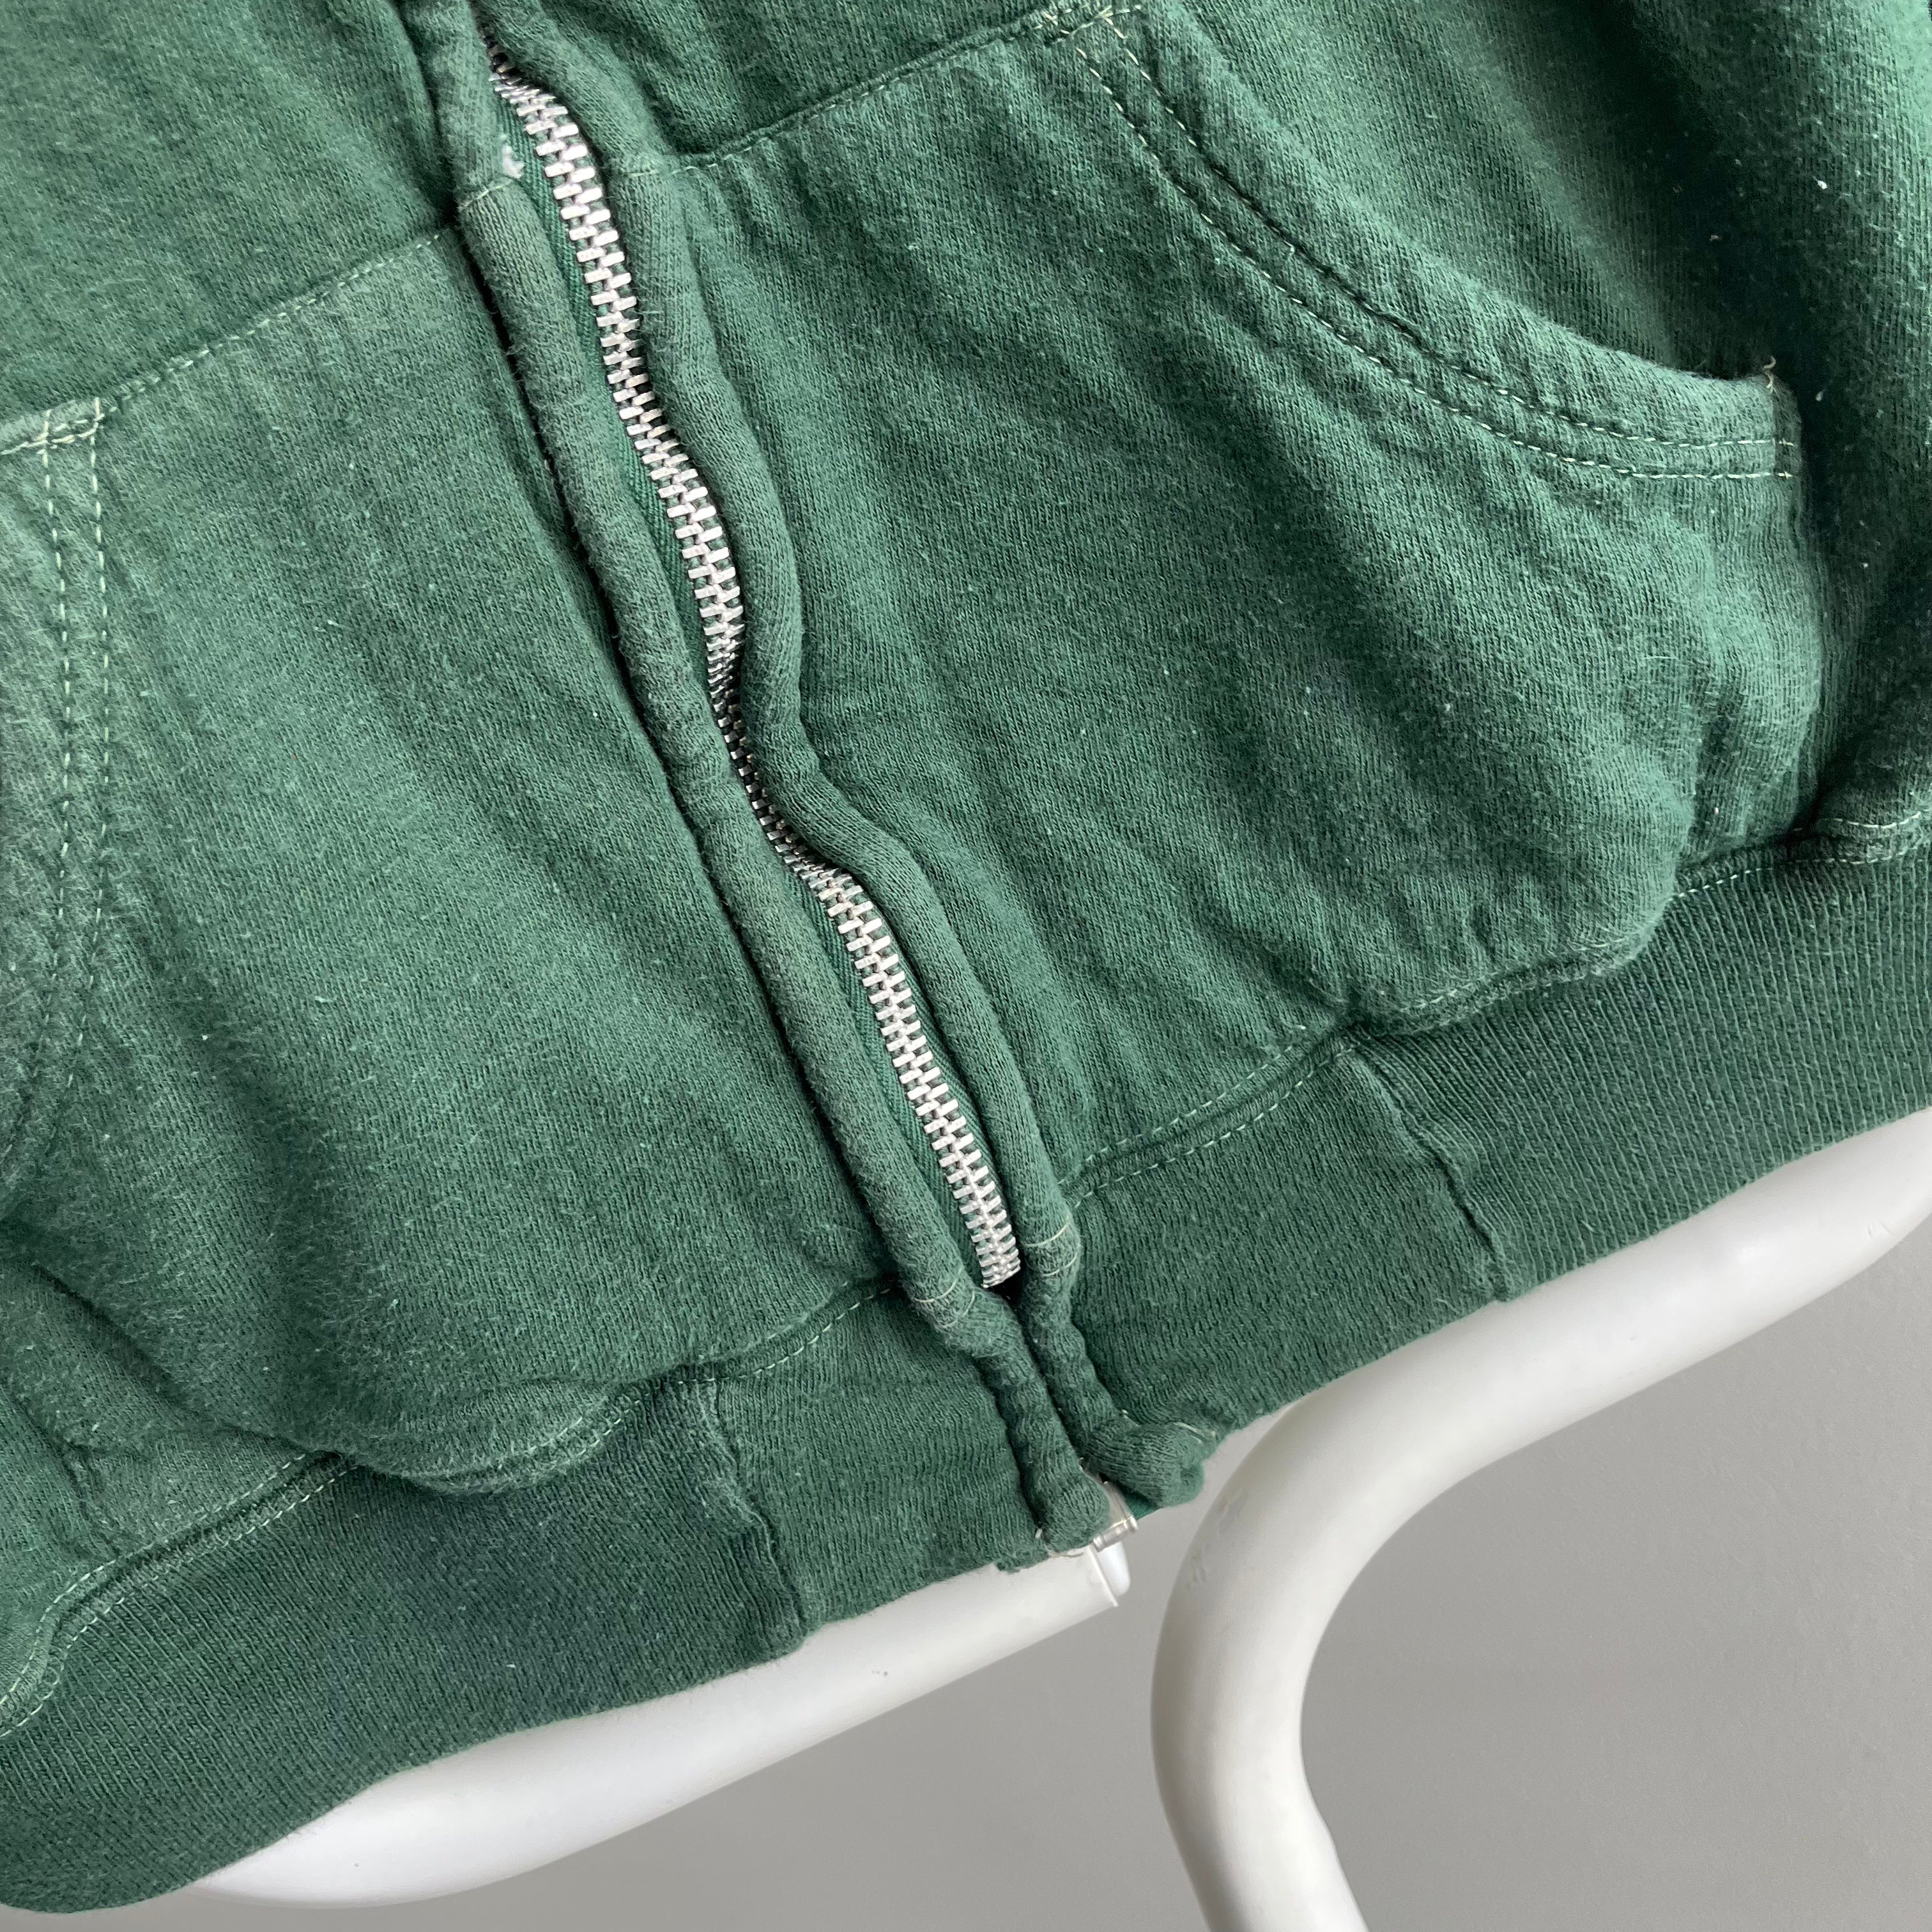 1970s Cotton!!! Waffle Lined Dark Green Beat Up Hoodie - Smaller Size